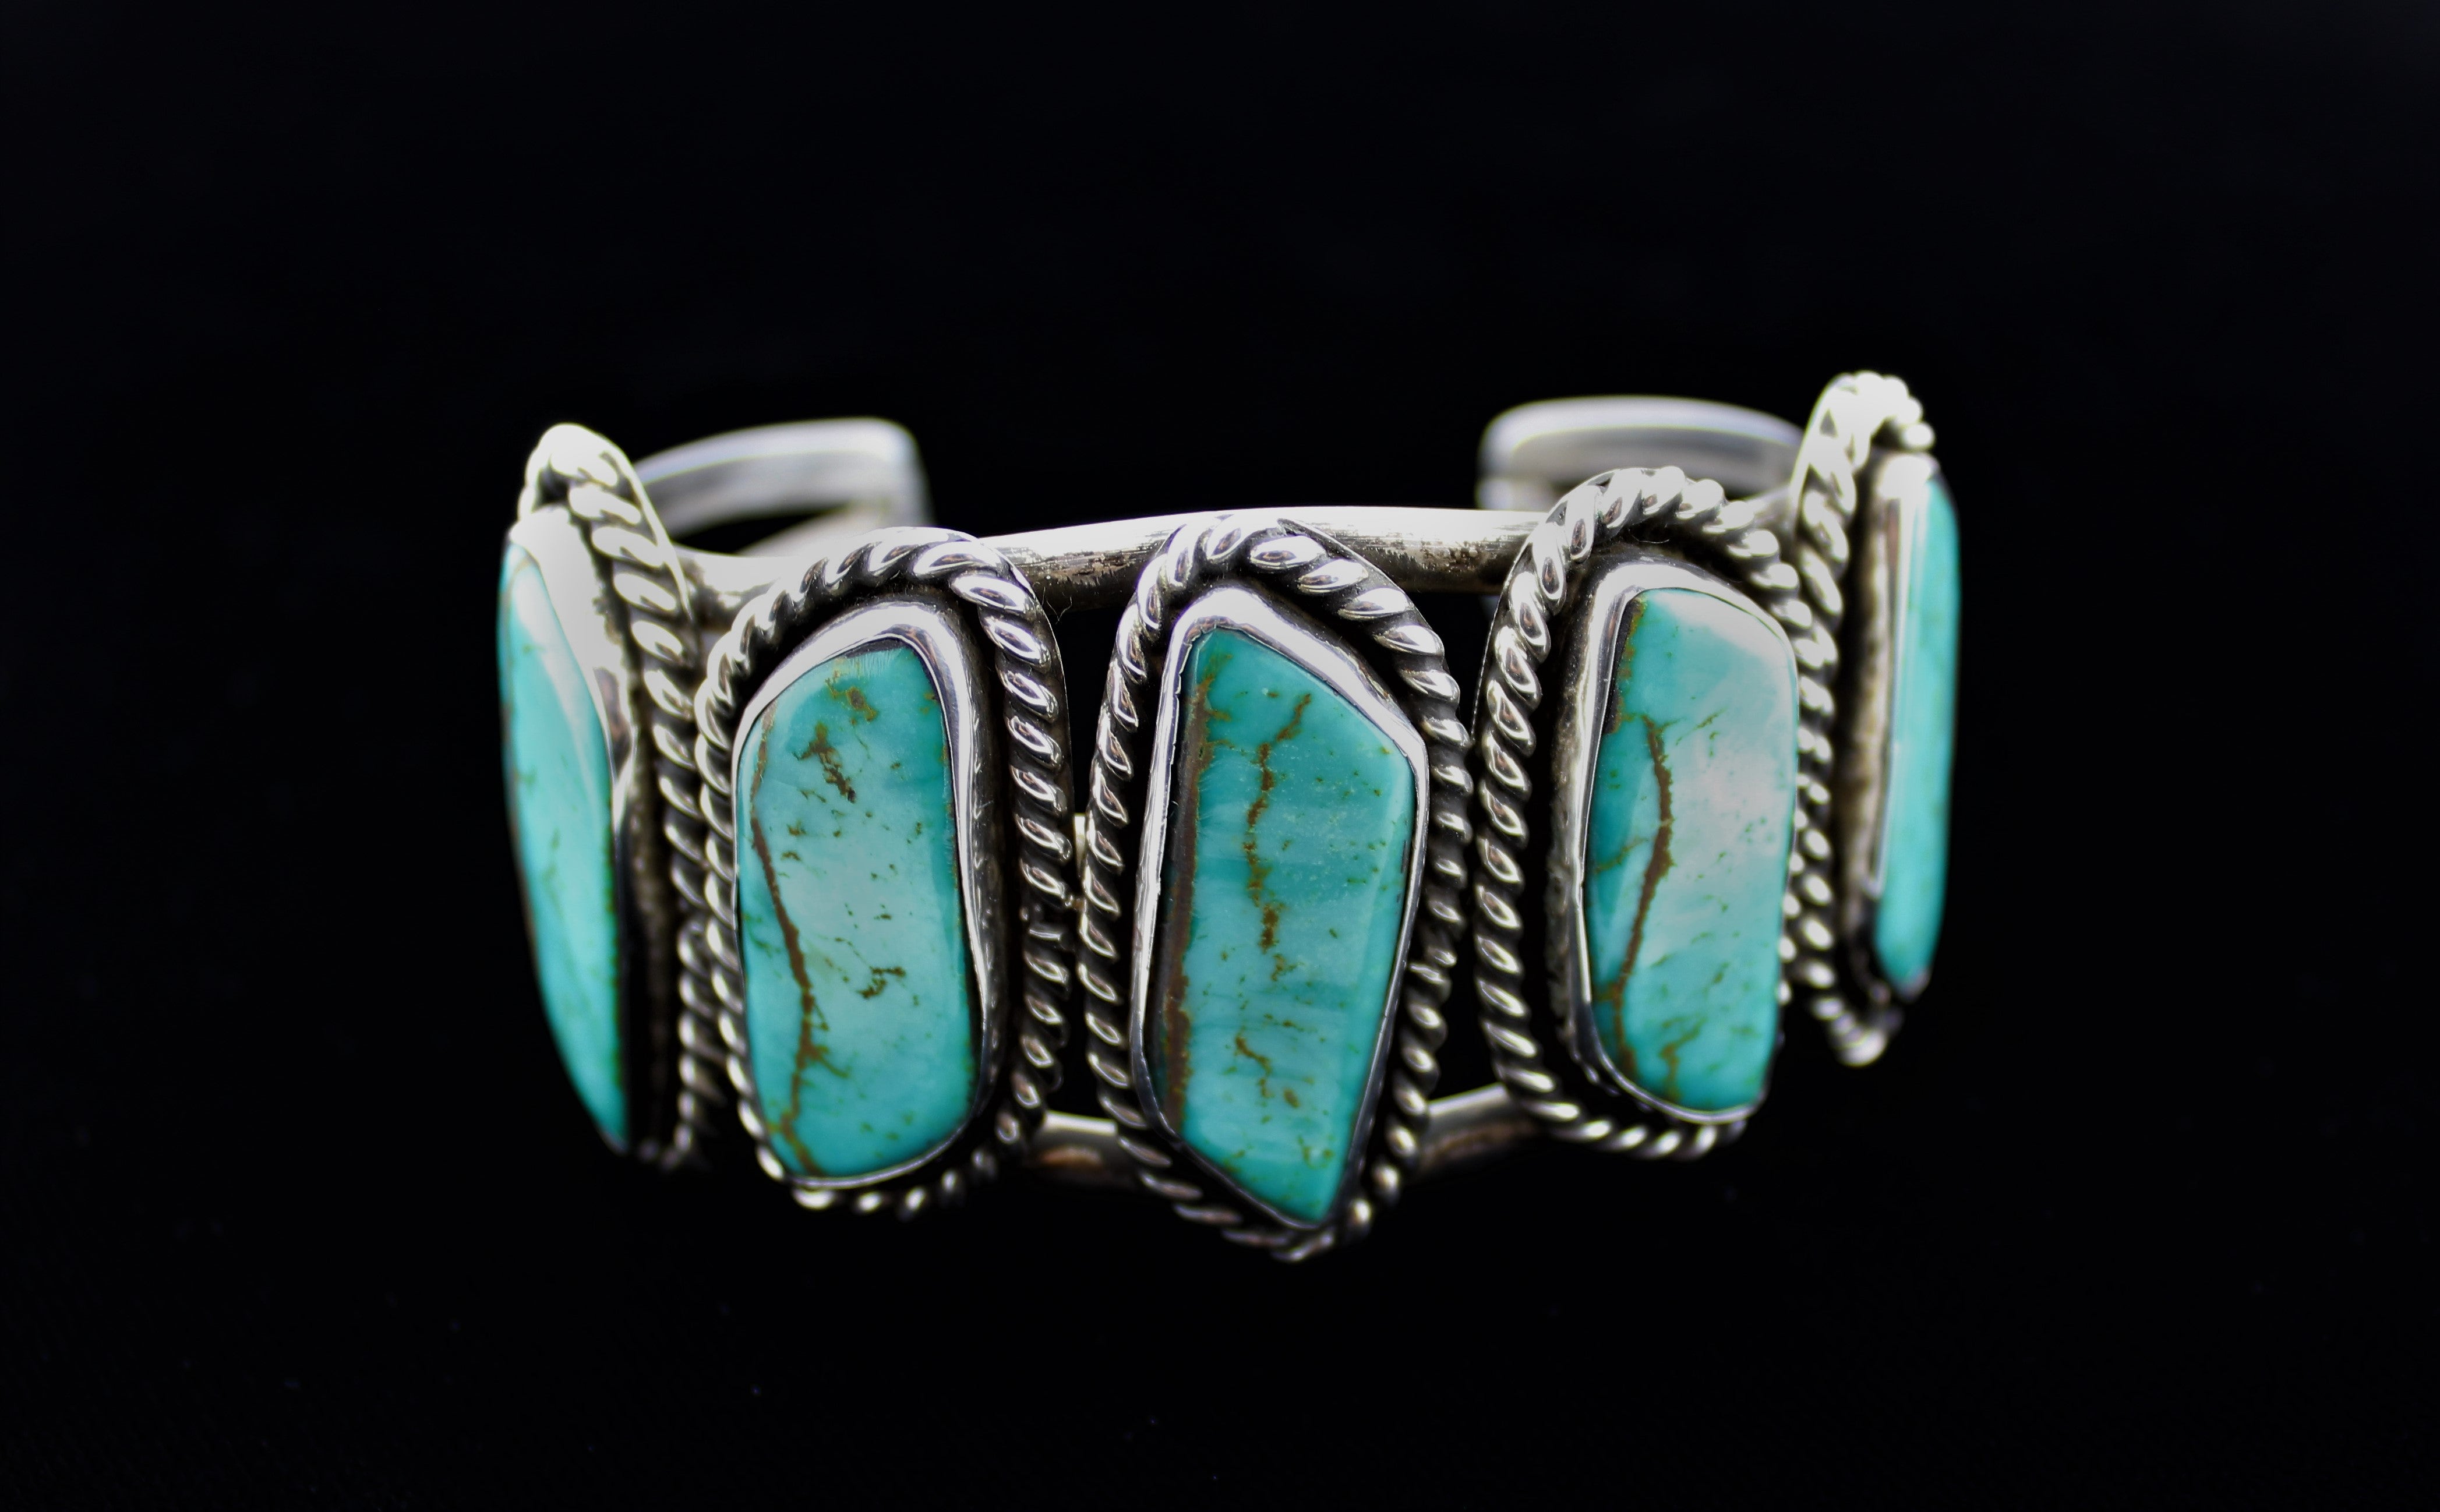 Sterling Silver and Turquoise Bracelet